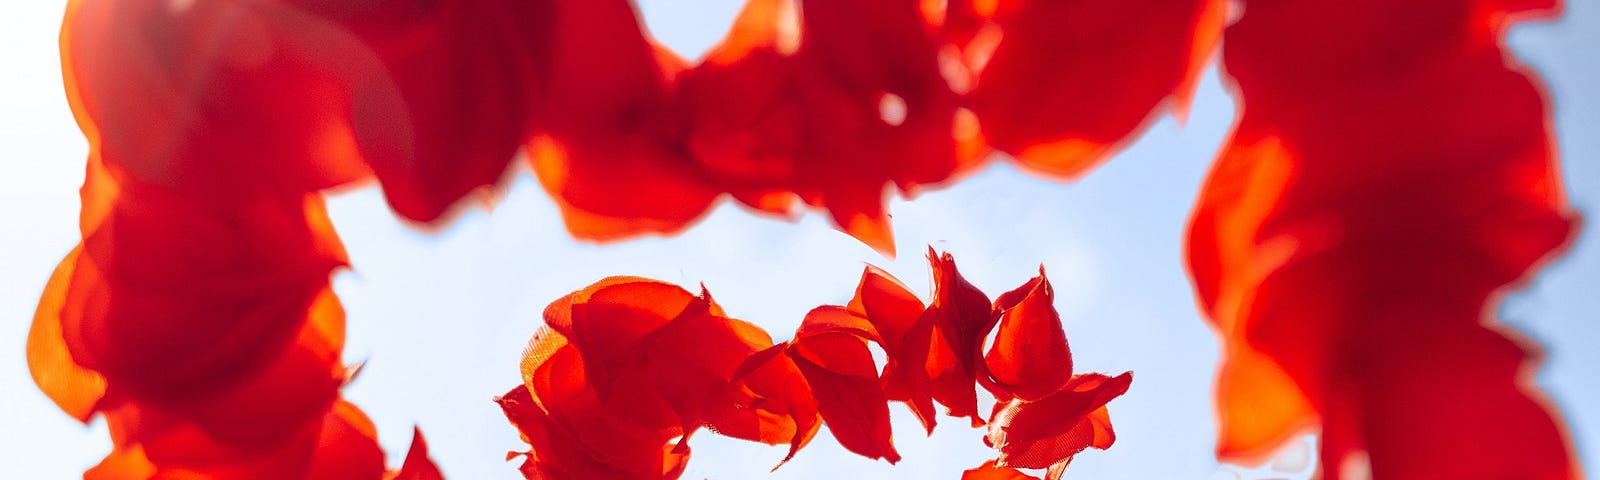 Red flower petals get further from camera in the shape of a heart, background is out of focus but may be sand and sky.